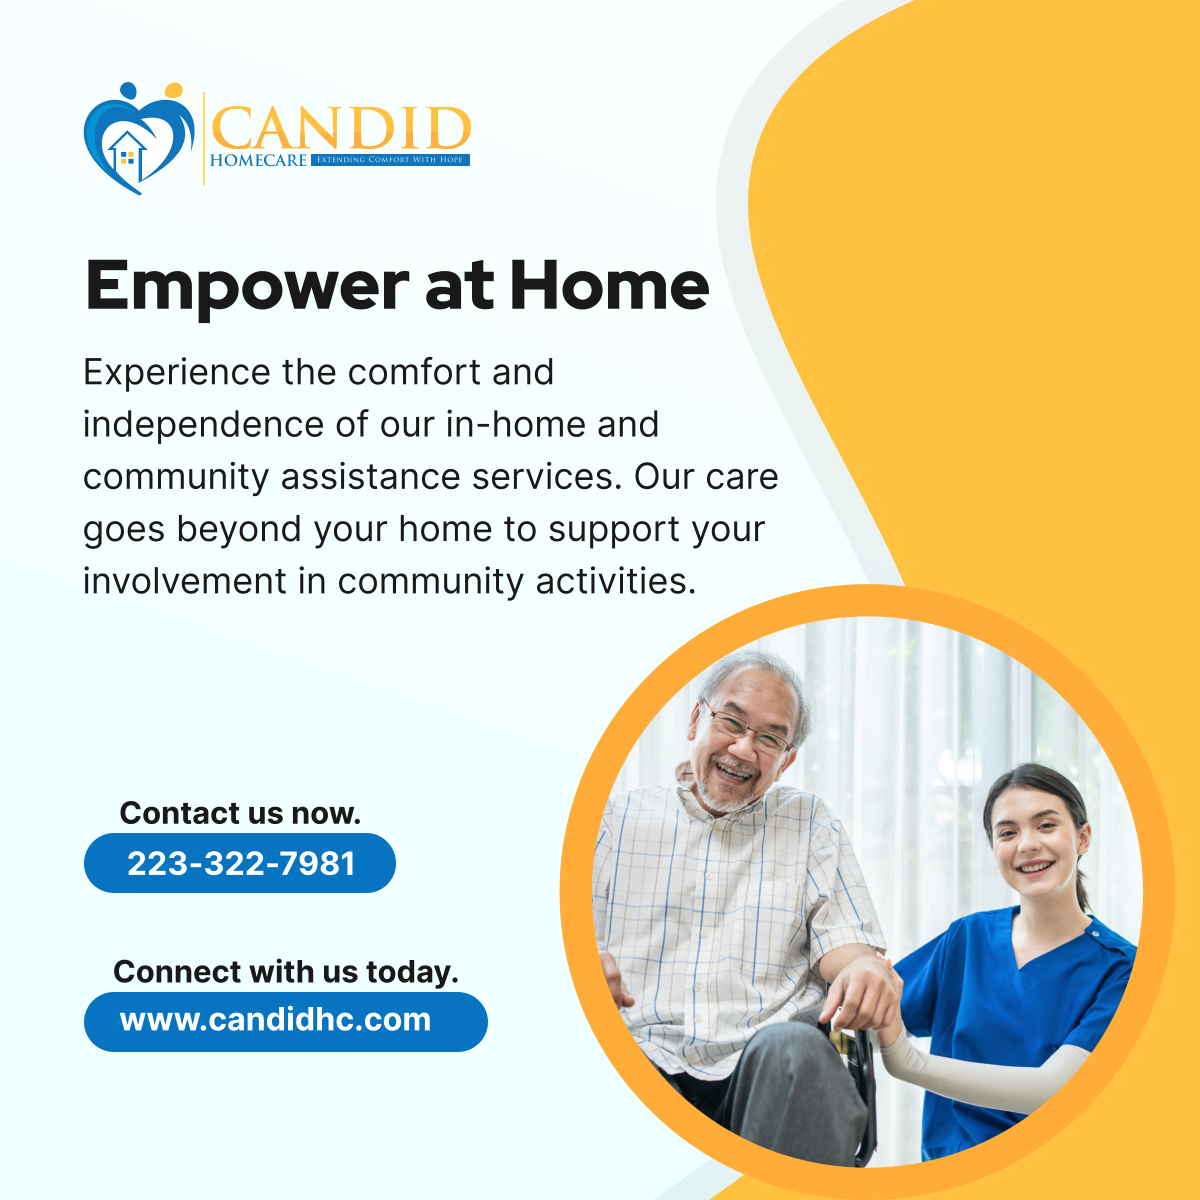 Discover a life of ease and connection with Candid Home Care, Inc.'s in-home and community assistance. We're here to help you thrive in the comfort of your home and stay engaged with your community.

#AssistanceServices #HarrisburgPA #HomeCare